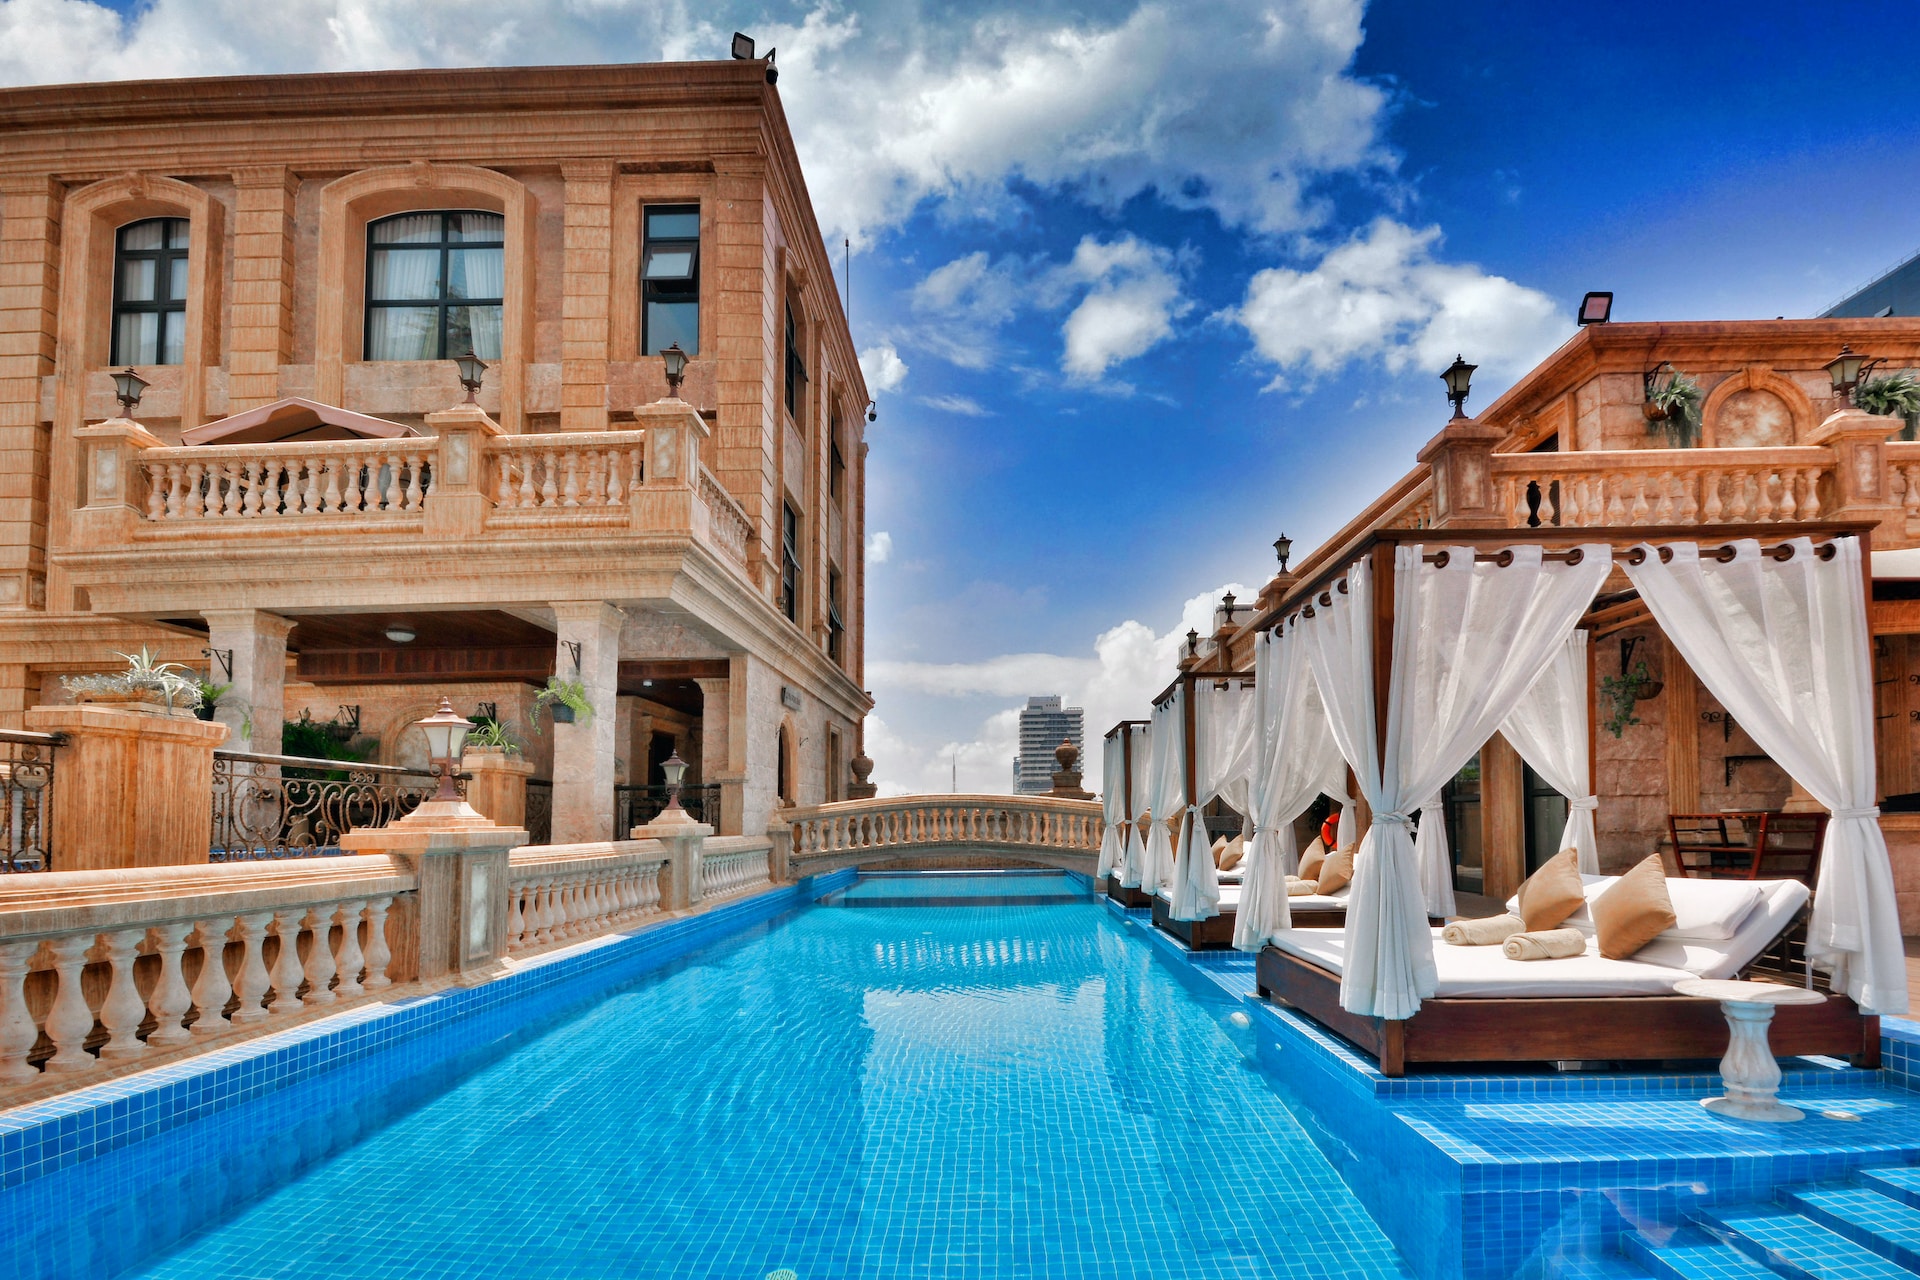 How to get the best deals on hotels in Europe?